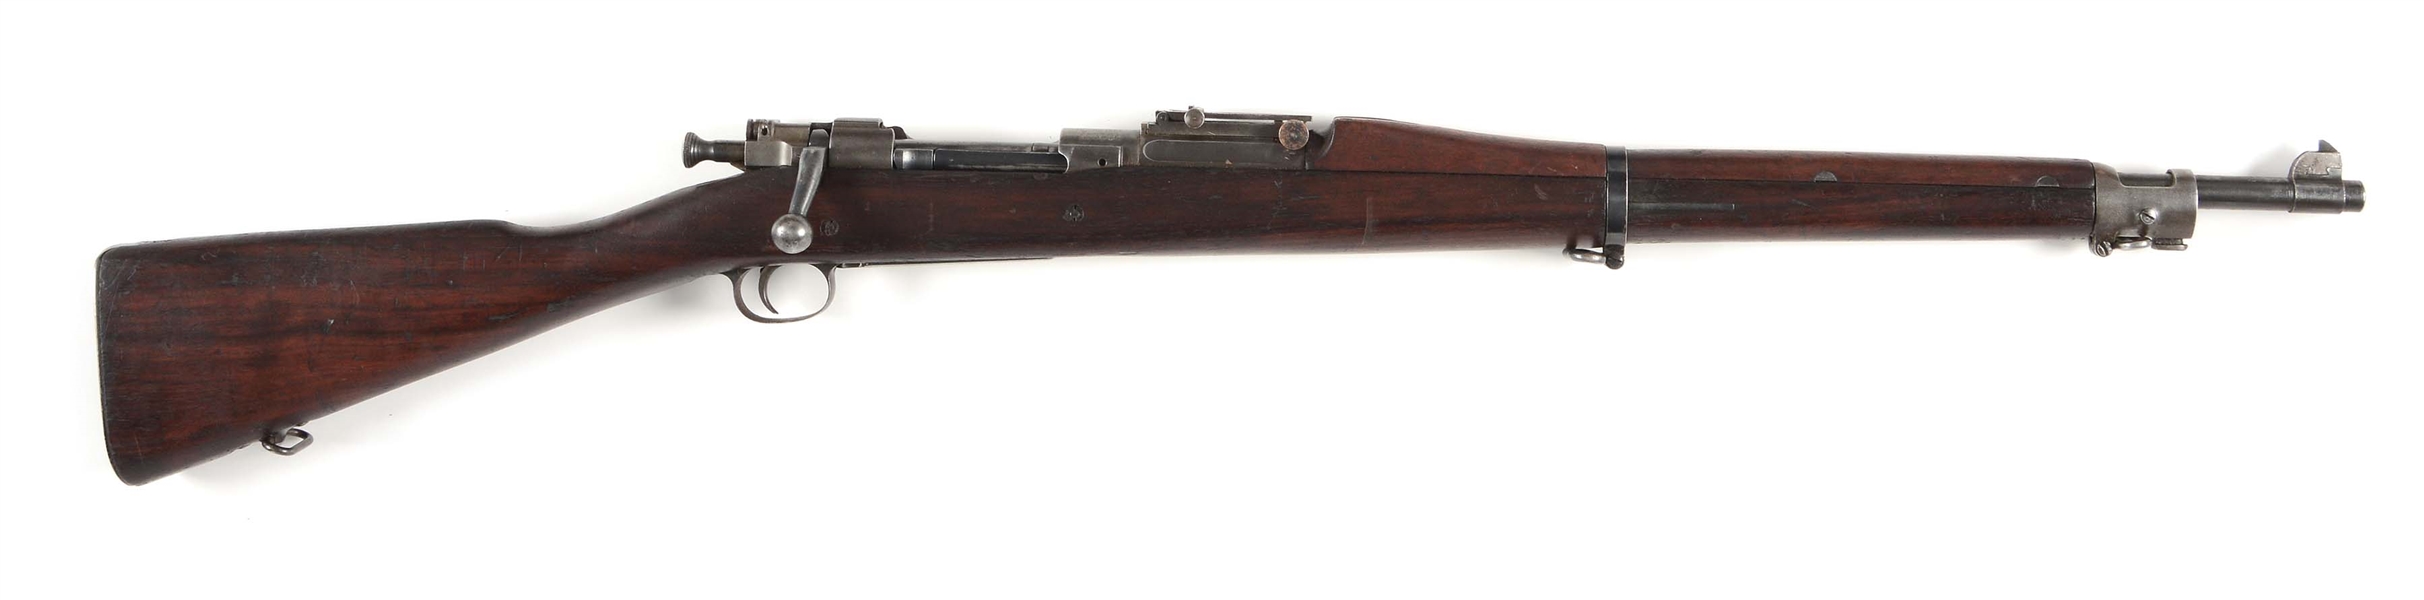 (C) US SPRINGFIELD ARMORY MODEL 1903 BOLT ACTION RIFLE.